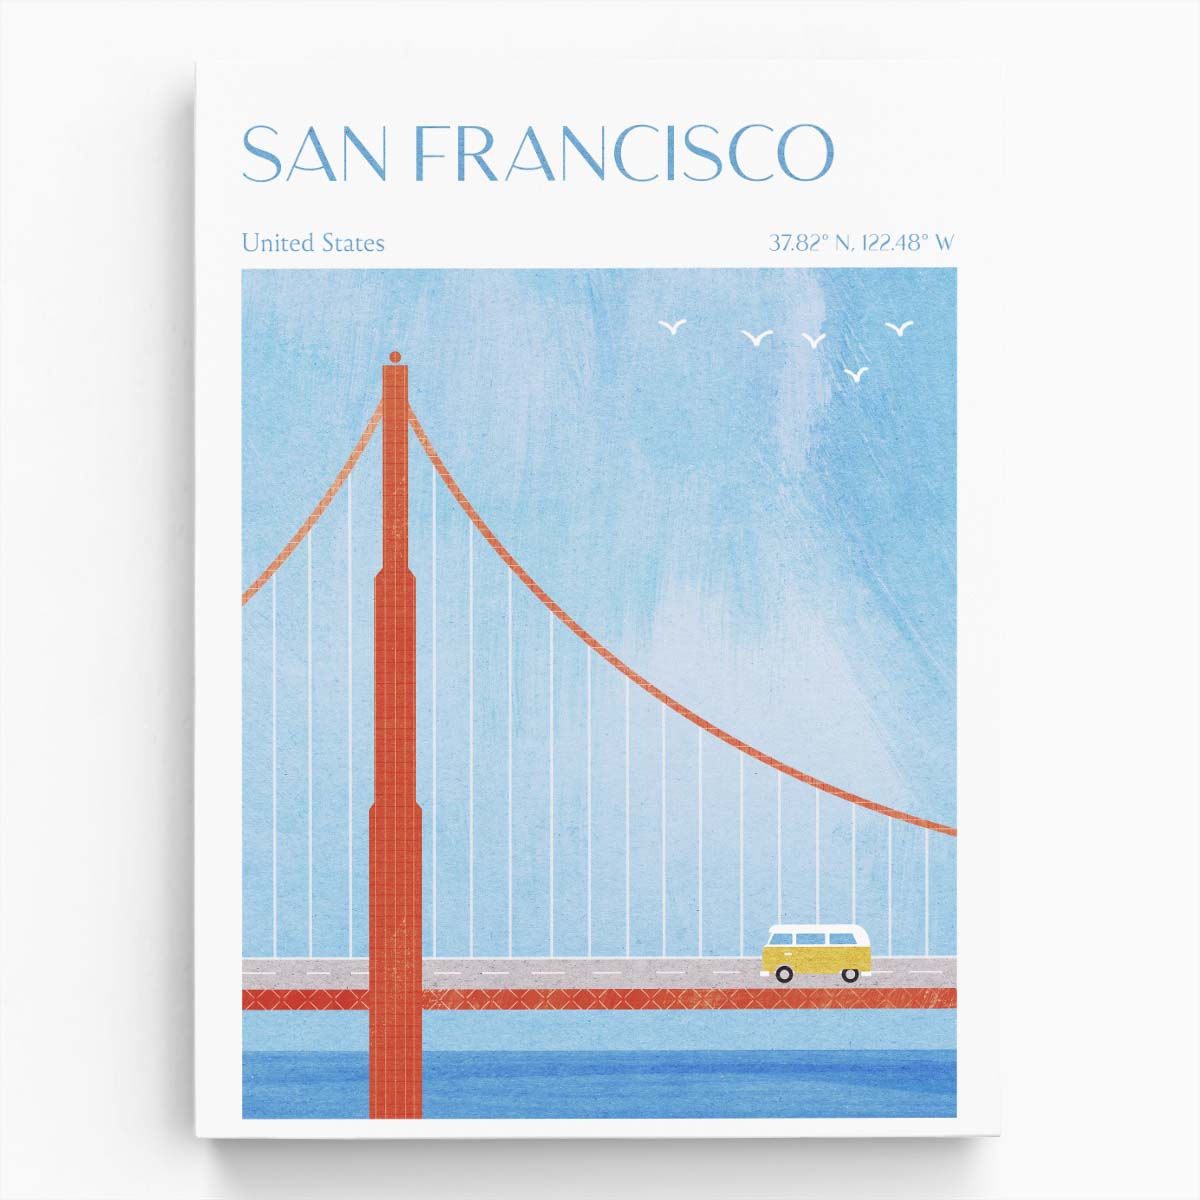 Colorful Inspirational Illustration of San Francisco's Iconic Golden Gate Bridge by Luxuriance Designs, made in USA